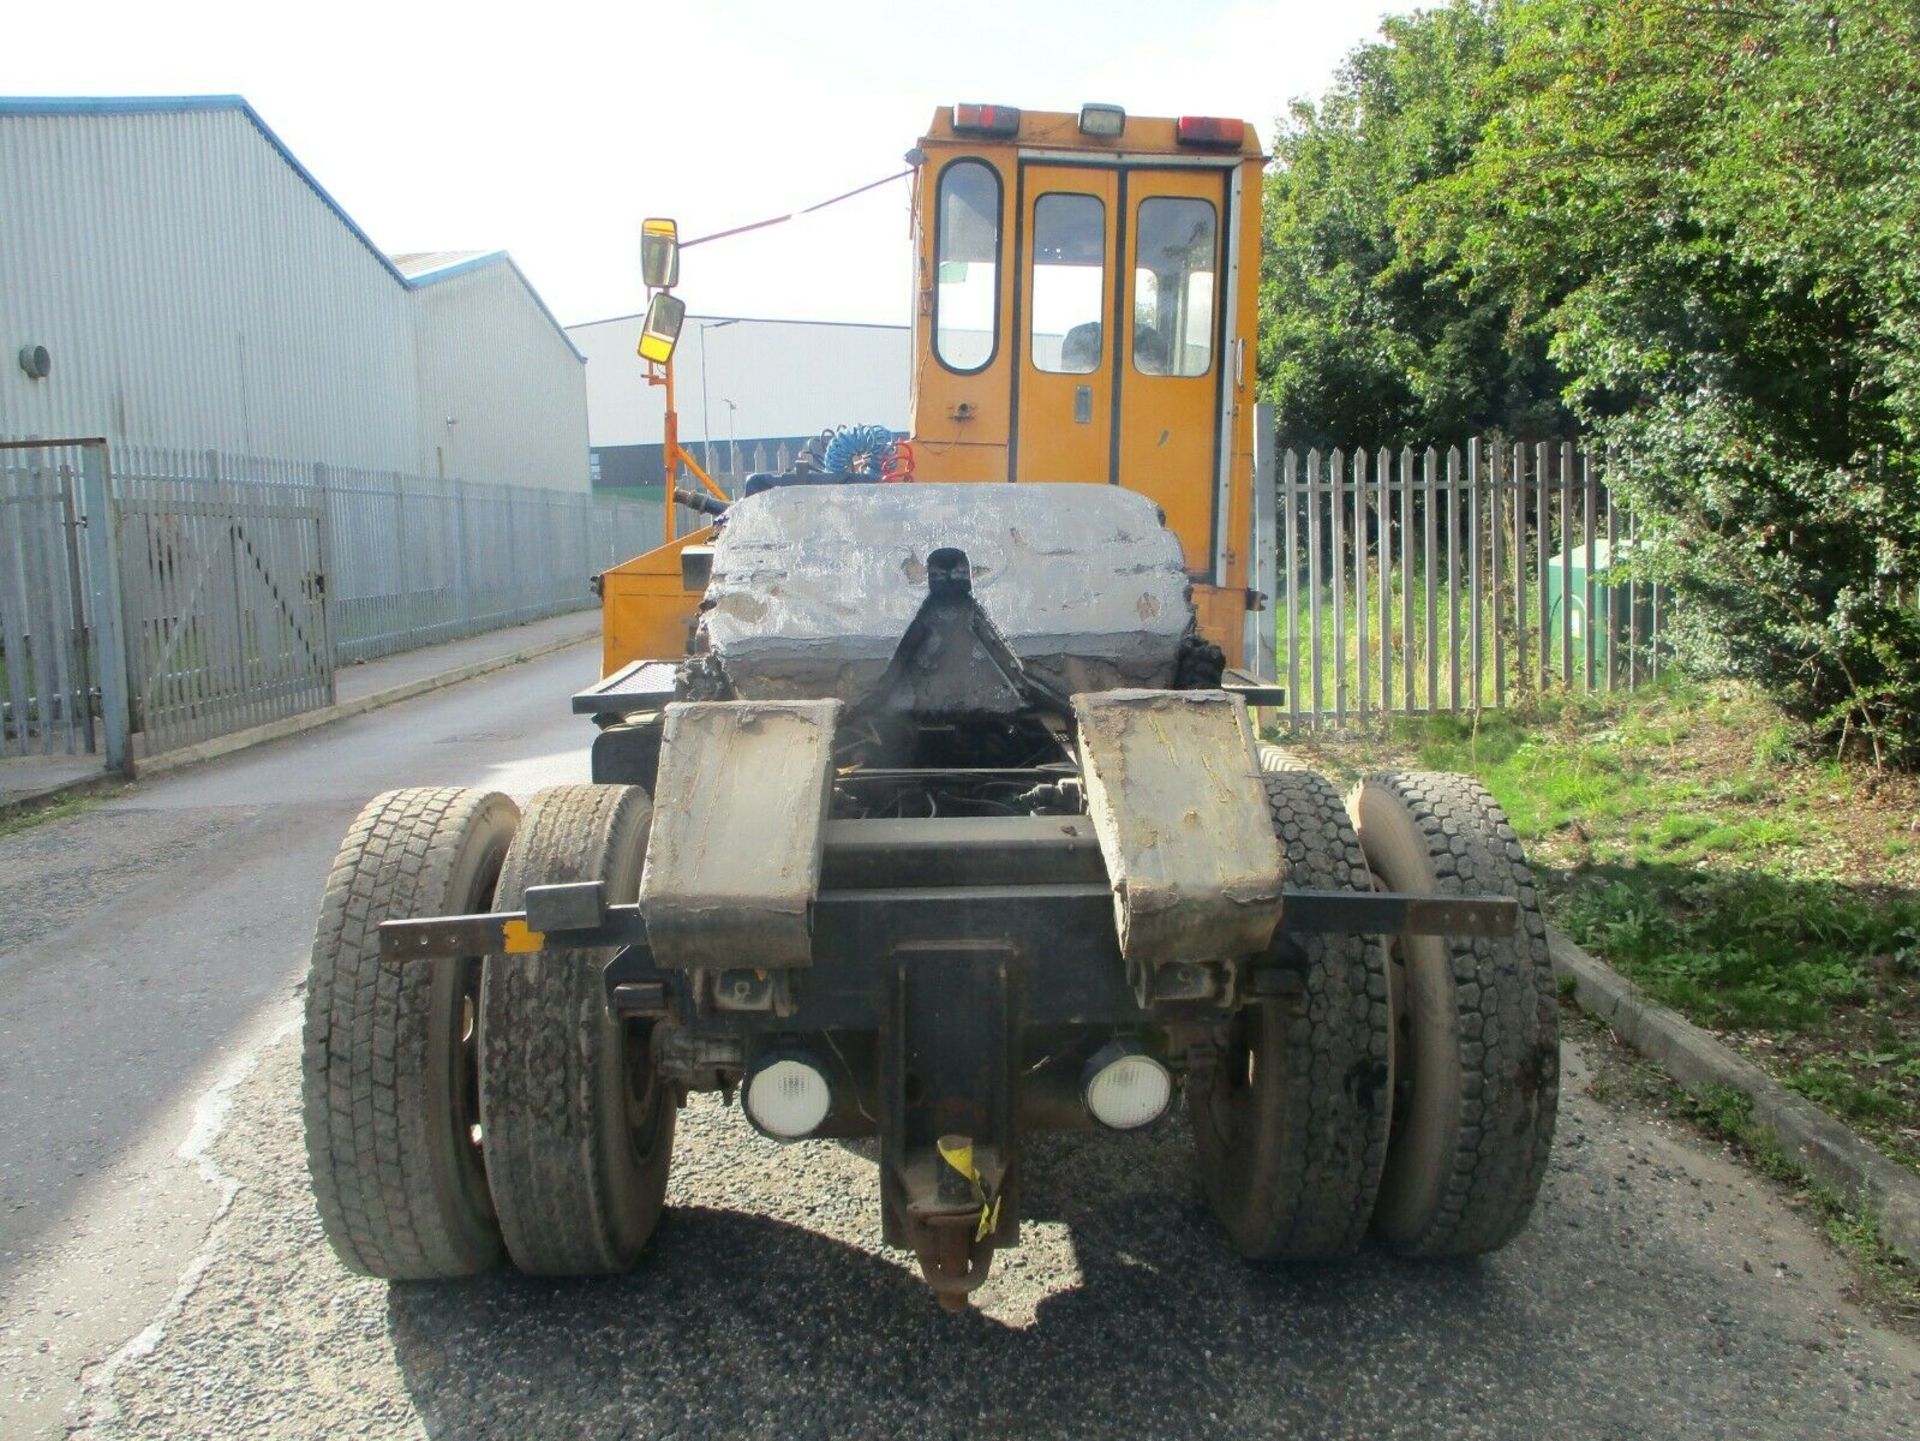 Reliance Dock spotter shunter tow tug tractor unit - Image 5 of 10